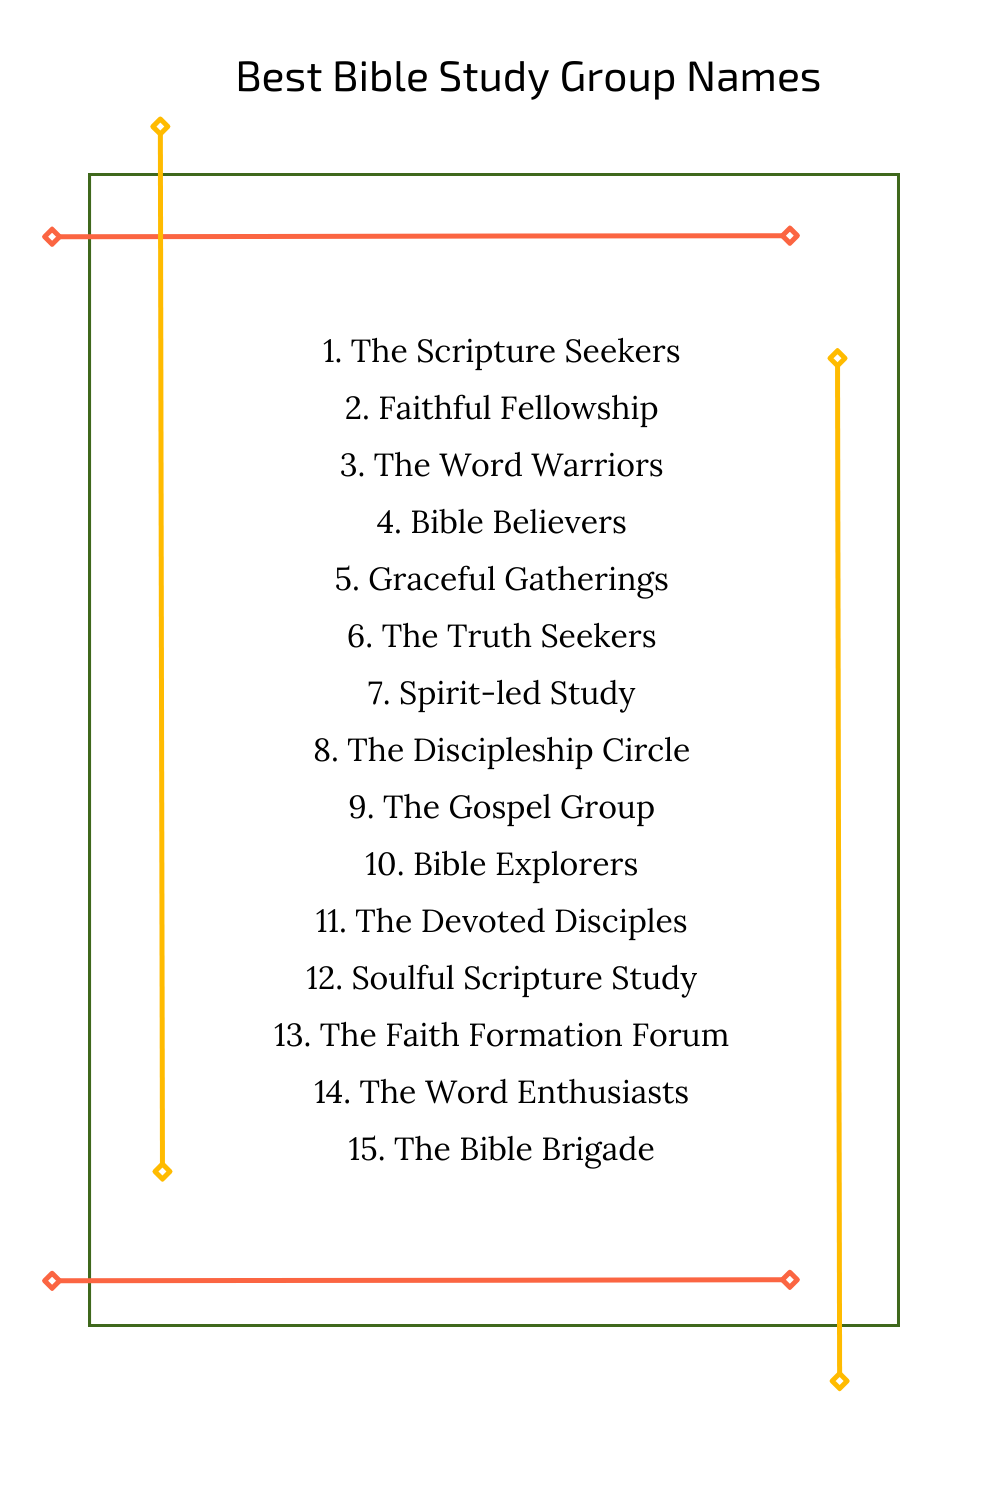 Best Bible Study Group Names